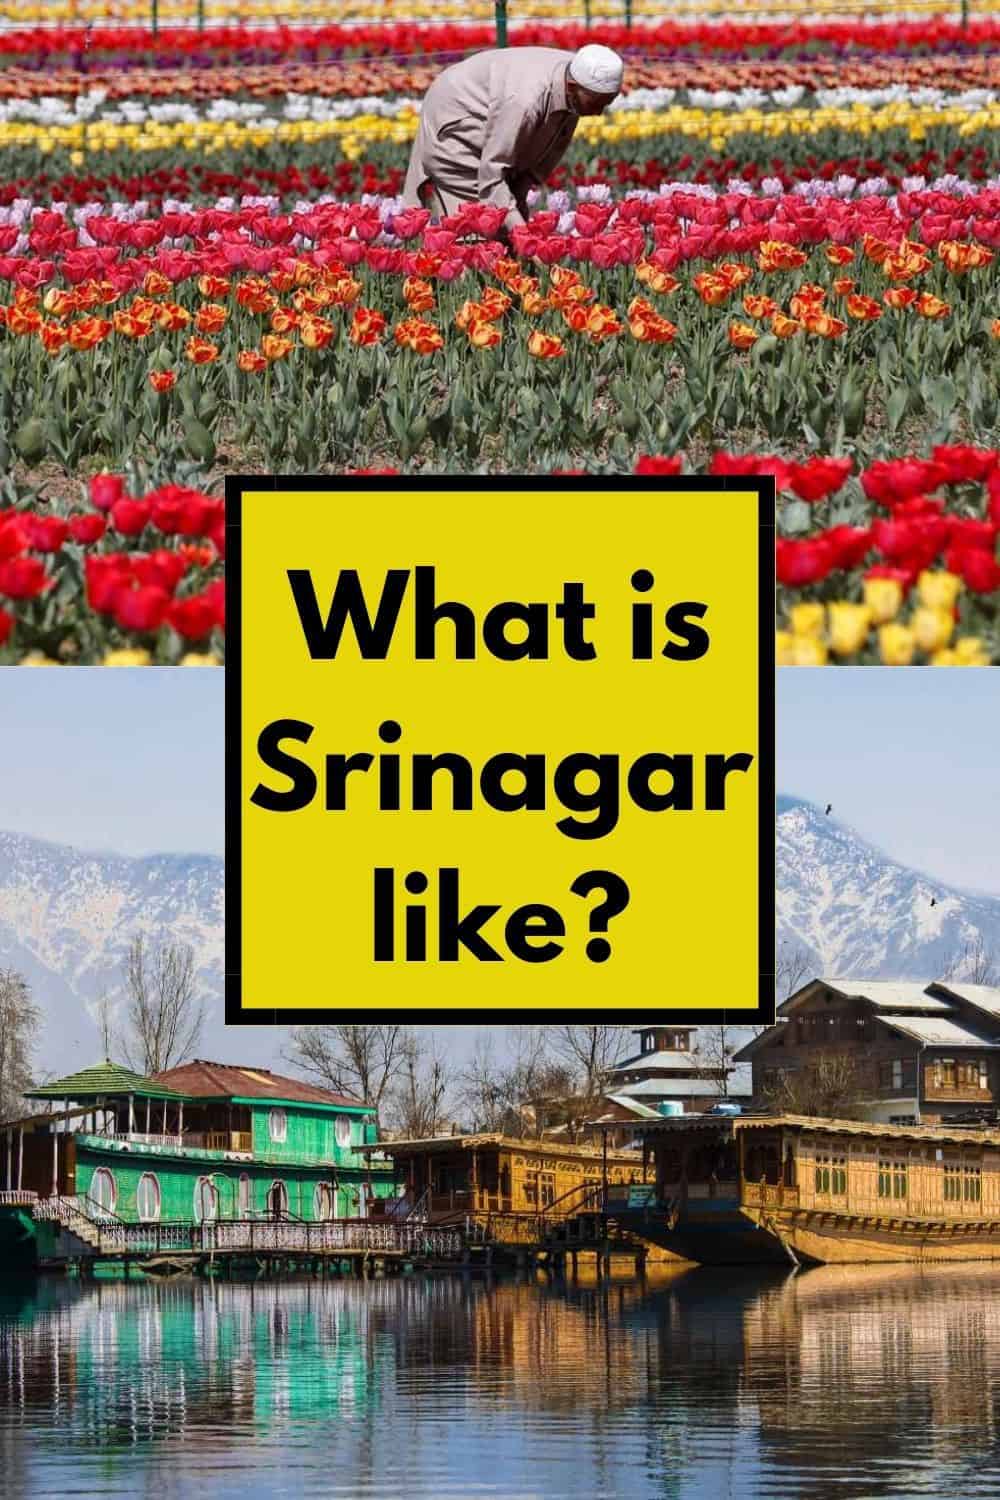 Srinagar is a unique place in India that was once a top tourist destination. Due to security isssues tourism almost disappeared in the 1990s, but in the last years Srinagar started to ttract tourists again. This guide tells you about what kind of place Srinagar is and all you need to know about the best places to visit and things to do in Srinagar. It has so much to offer for visitors: Shlaimar Bagh and Nishat Bagh gardens, Shikara ride on the Dal lake, floating gardens, Shankaracharya Hindu temple, Shah Hamadan and Hazratbal mosque #best time to visit Srinagar #mosques in Srinagar #what is Srinagar like #best things to do in Srinagar